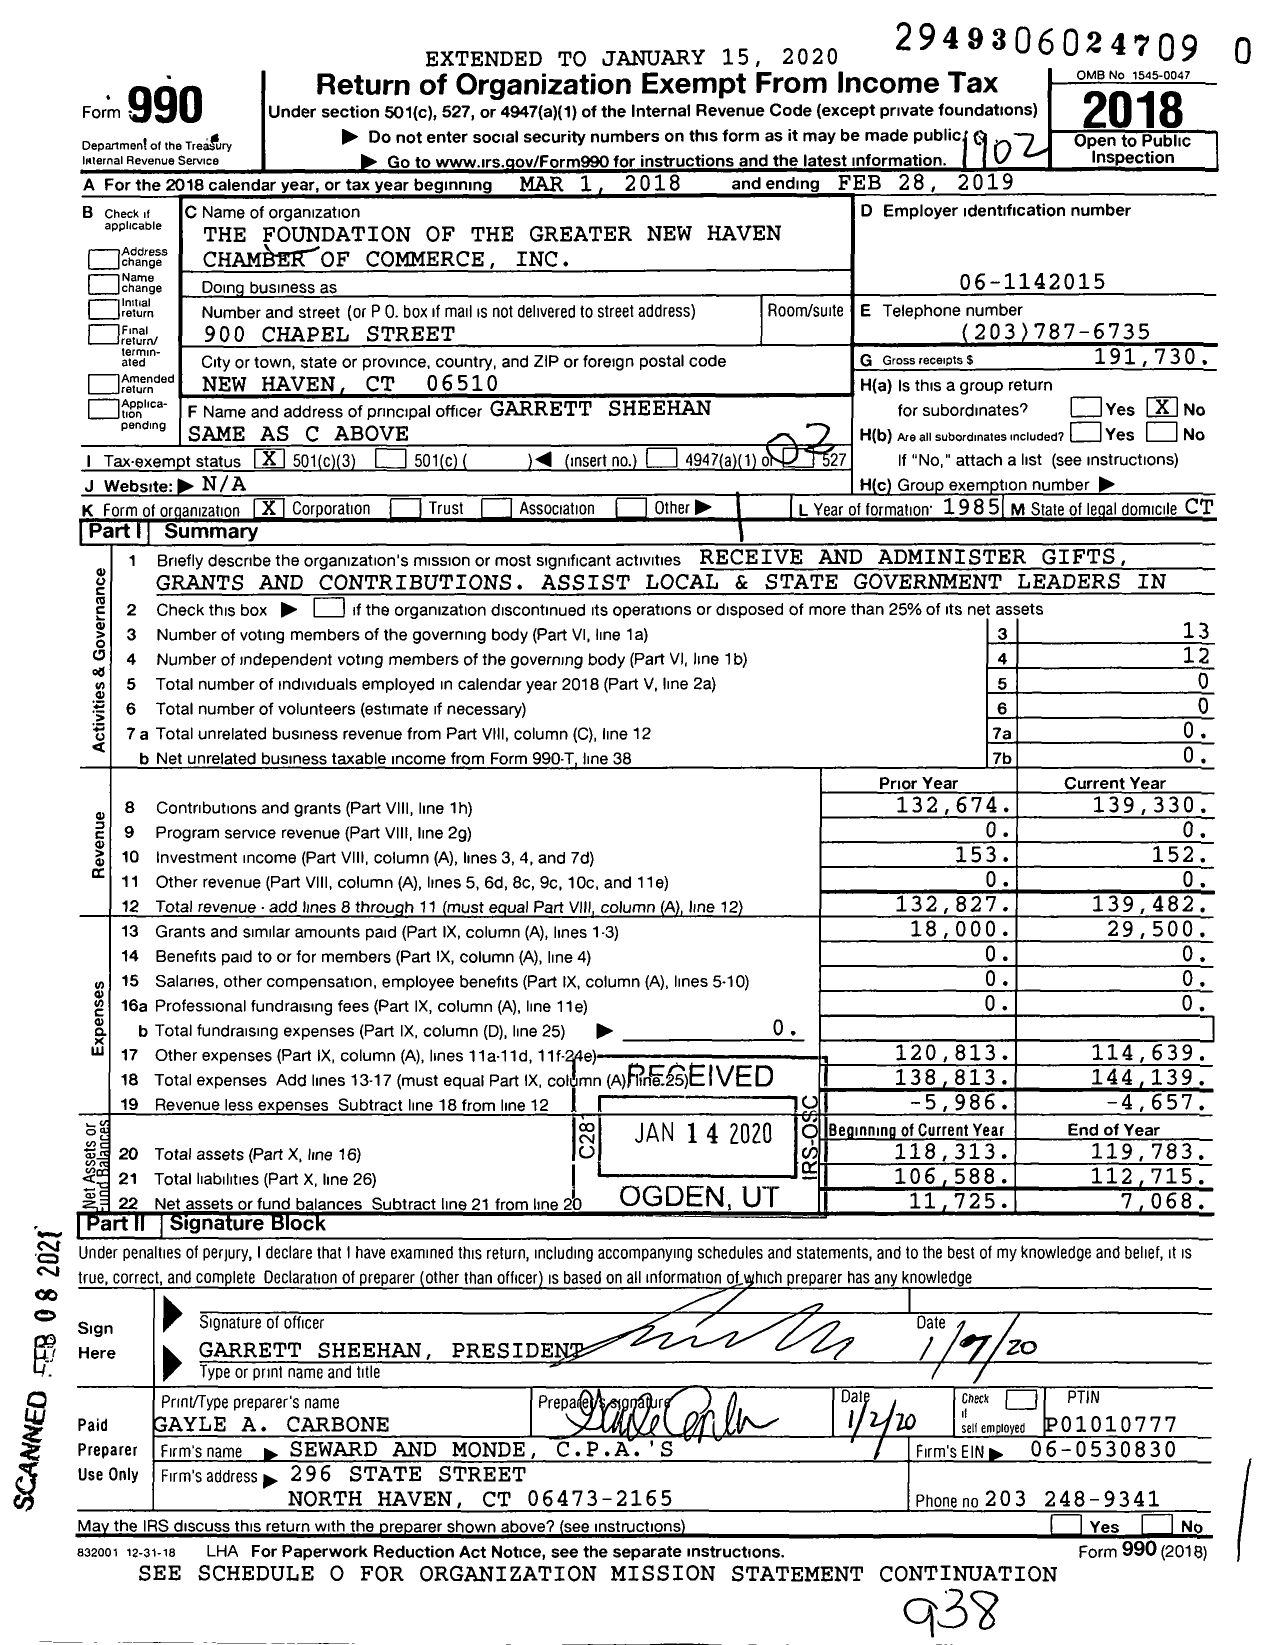 Image of first page of 2018 Form 990 for The Foundation of the Greater New Haven Chamber of Commerce